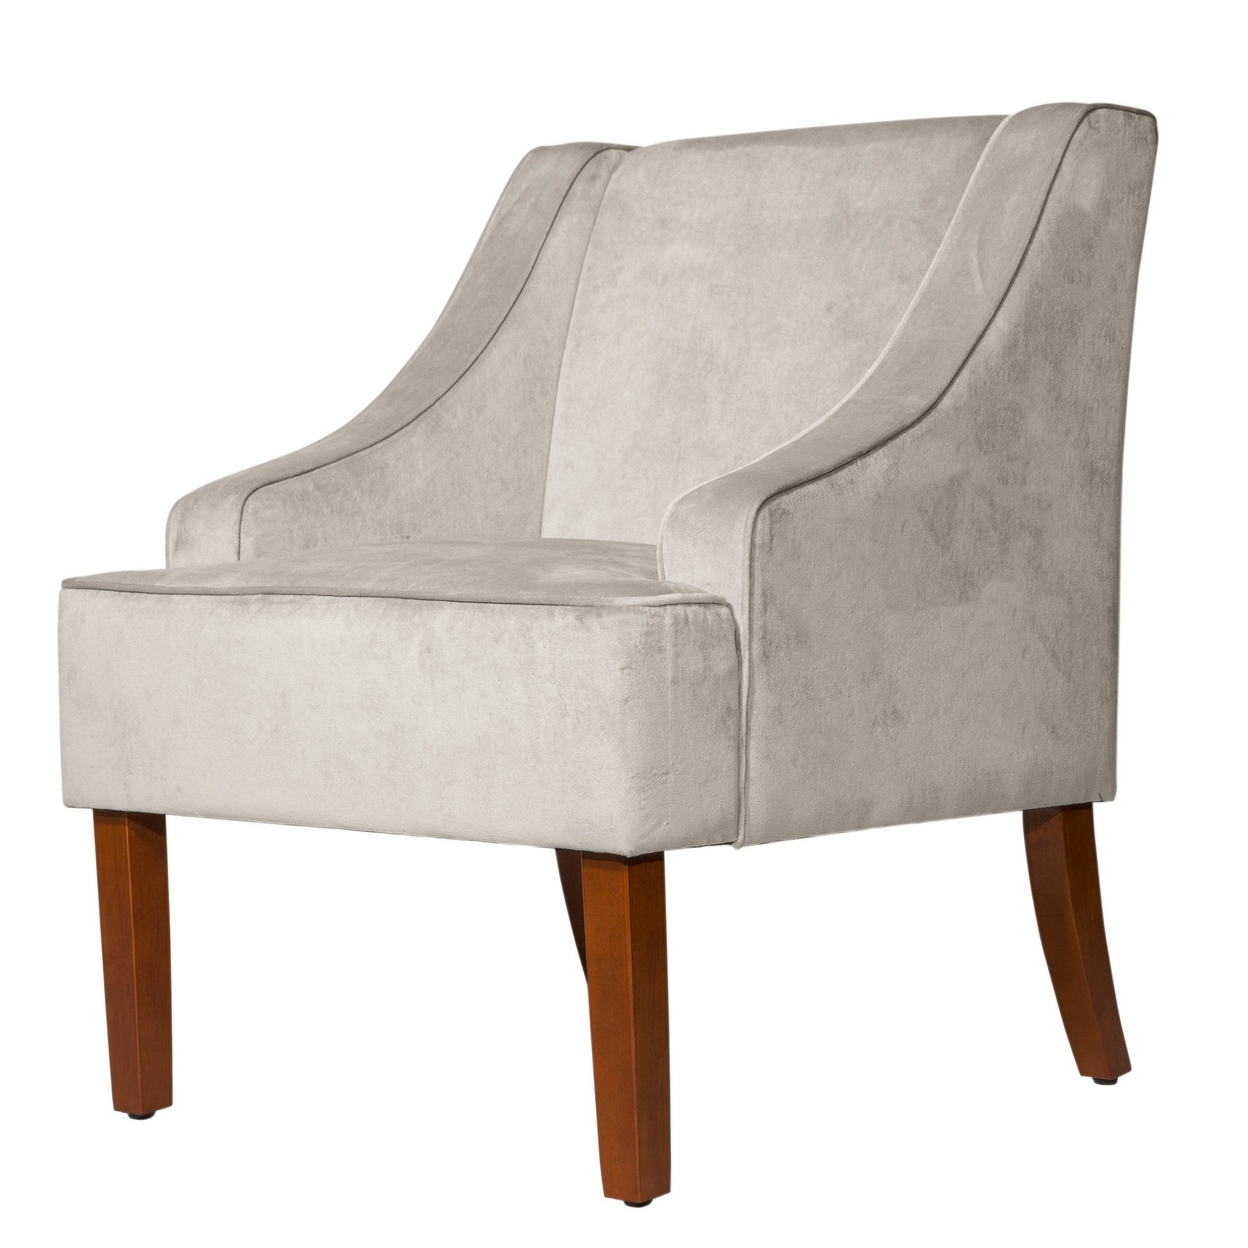 Velvet Fabric Upholstered Wooden Accent Chair With Swooping Armrests, Gray And Brown- Saltoro Sherpi